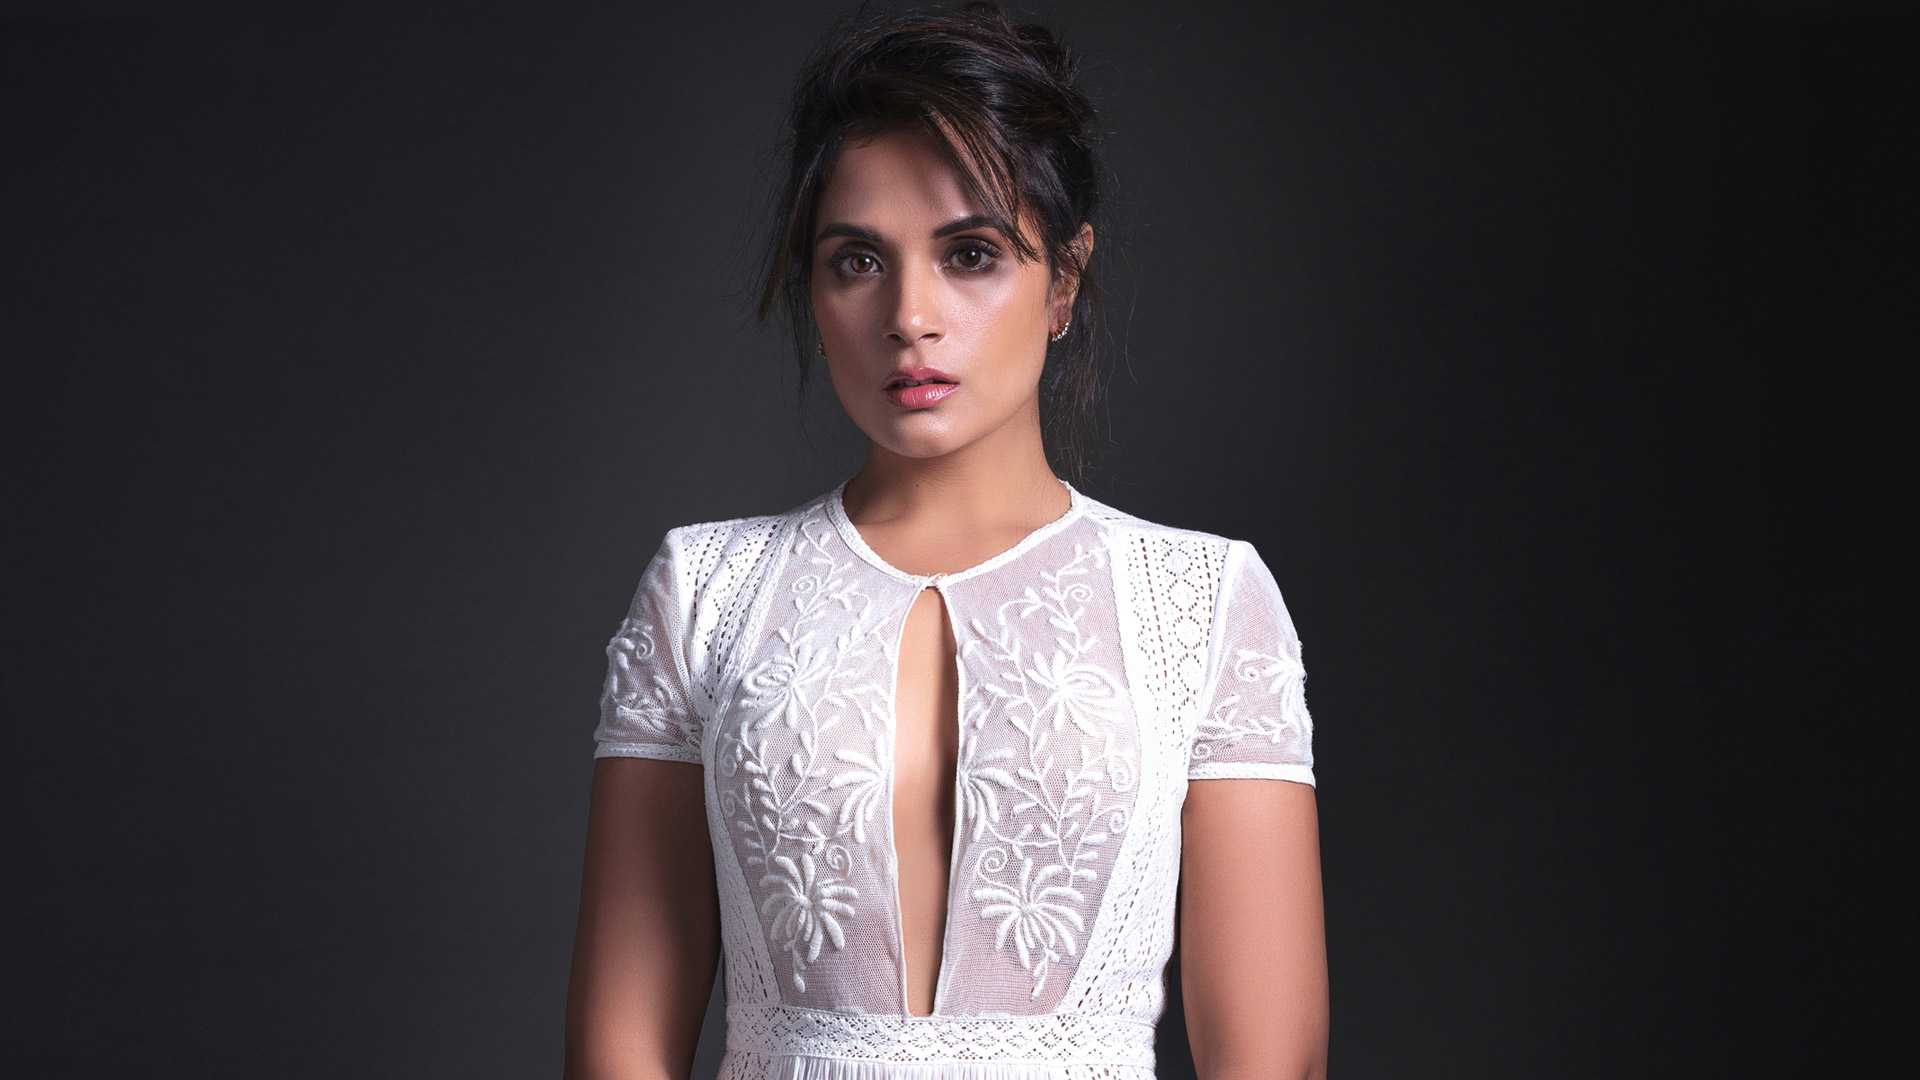 Richa Chadha’s first character promo from Inside Edge